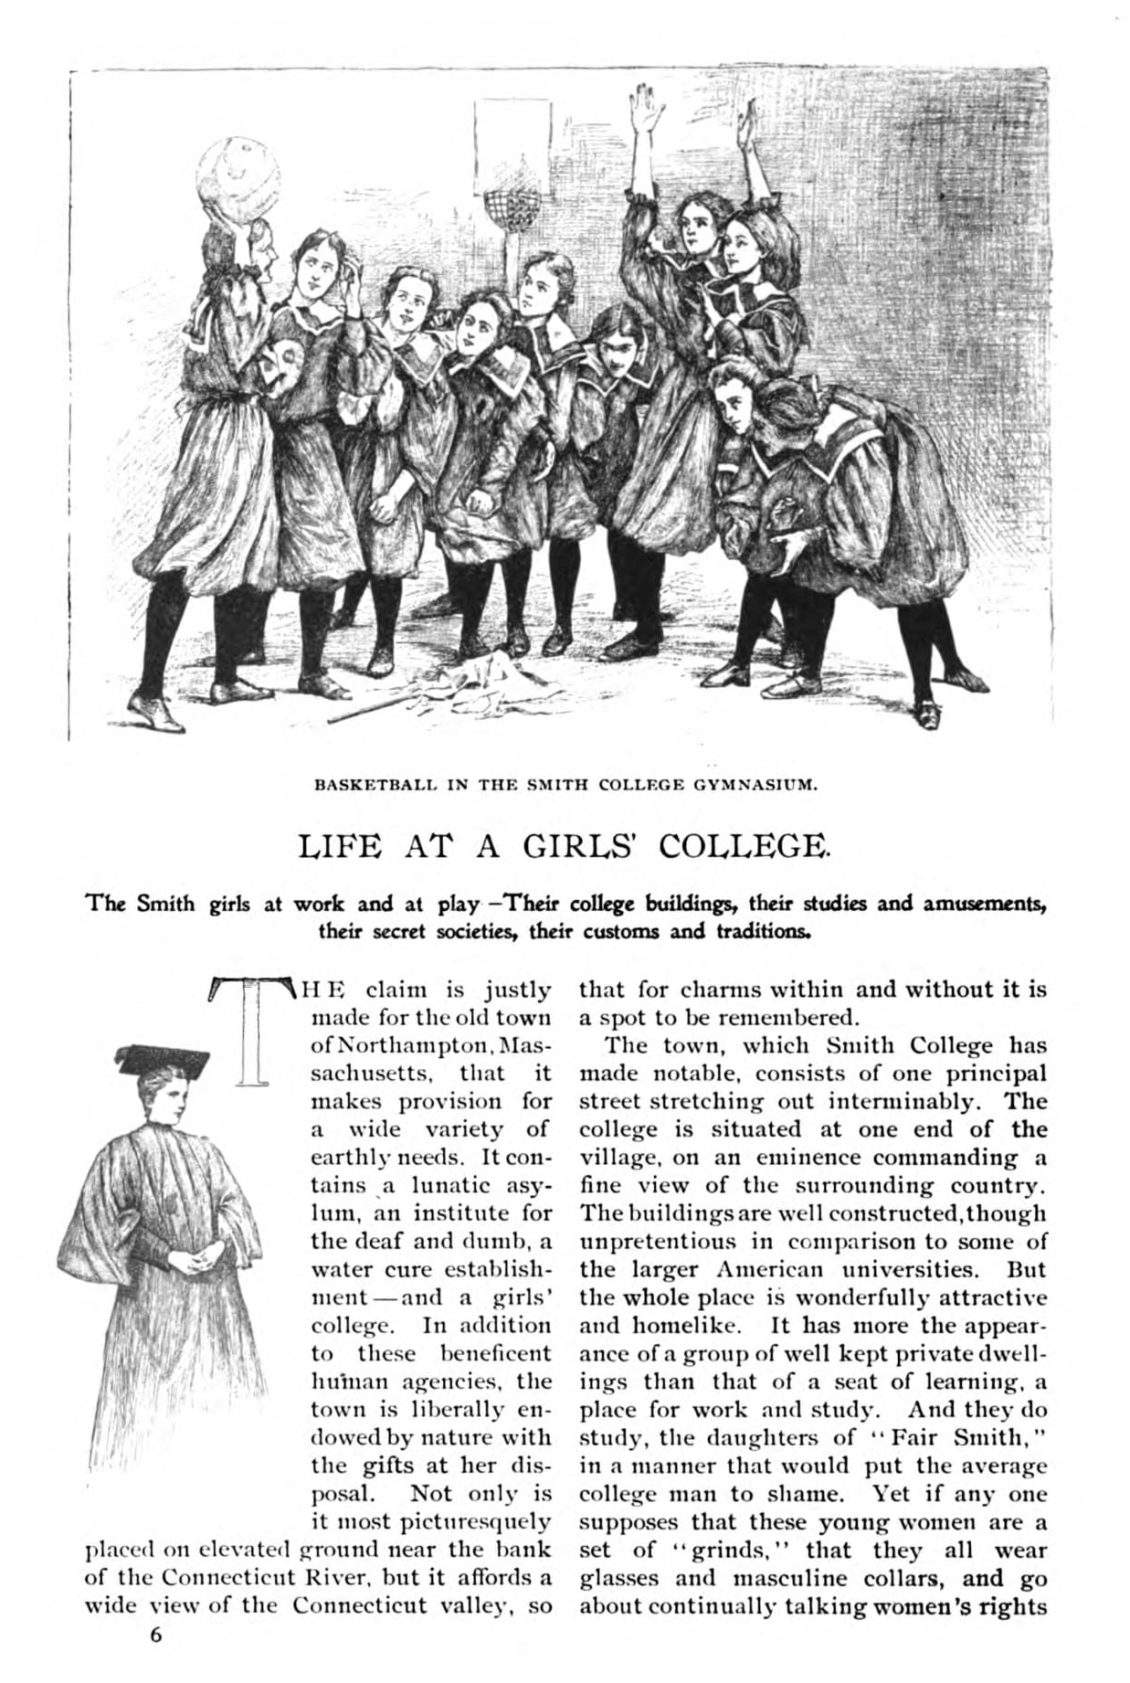 The first page of the article, Life at a Girls College, showing the opening text under an illustration of a group of women in winter coats.